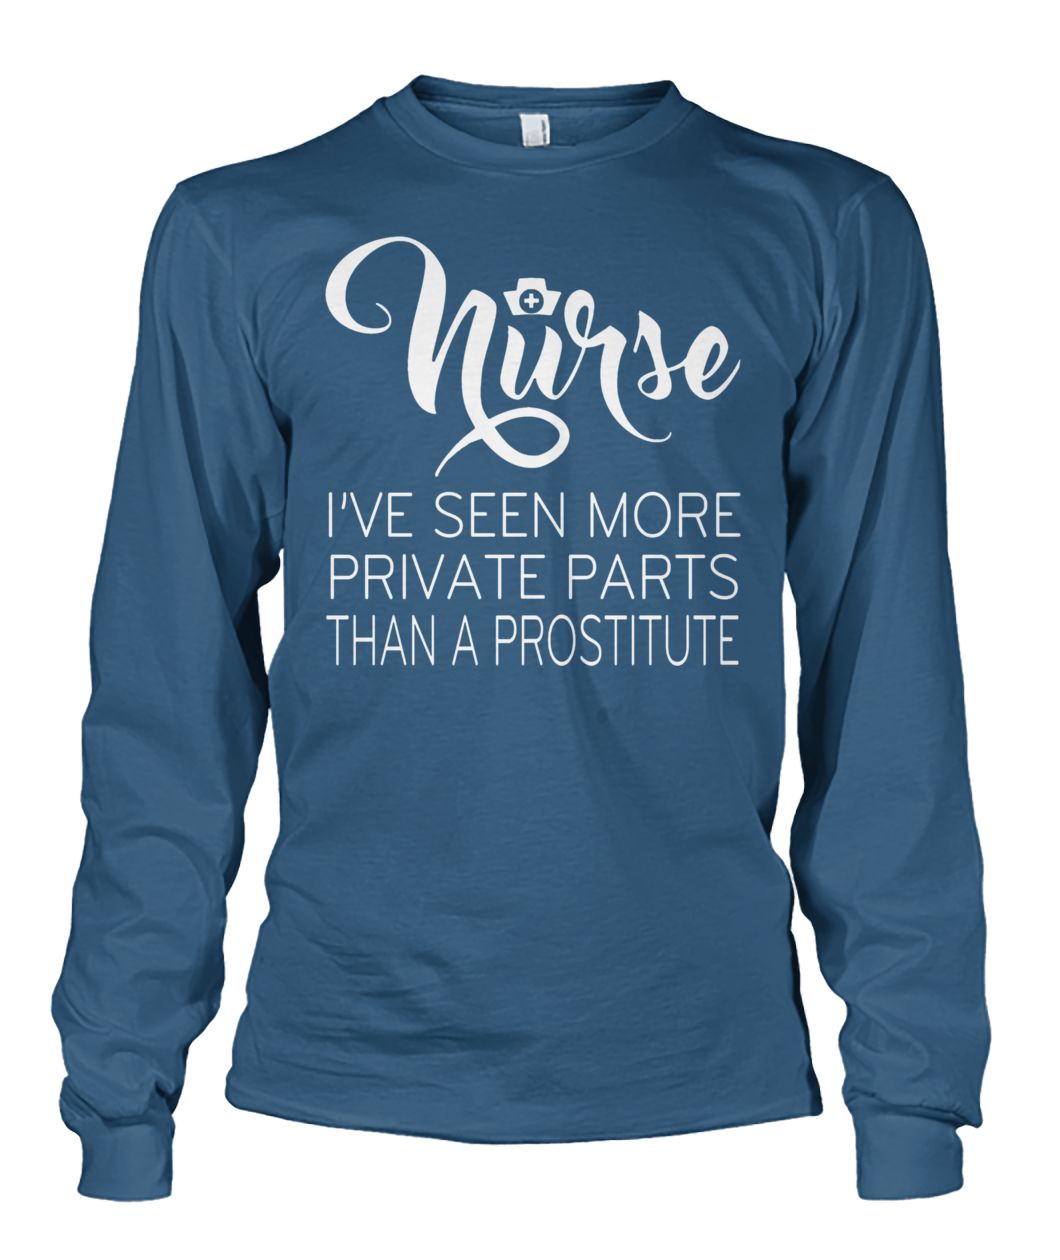 Nurse I've seen more private parts than a prostitute unisex long sleeve